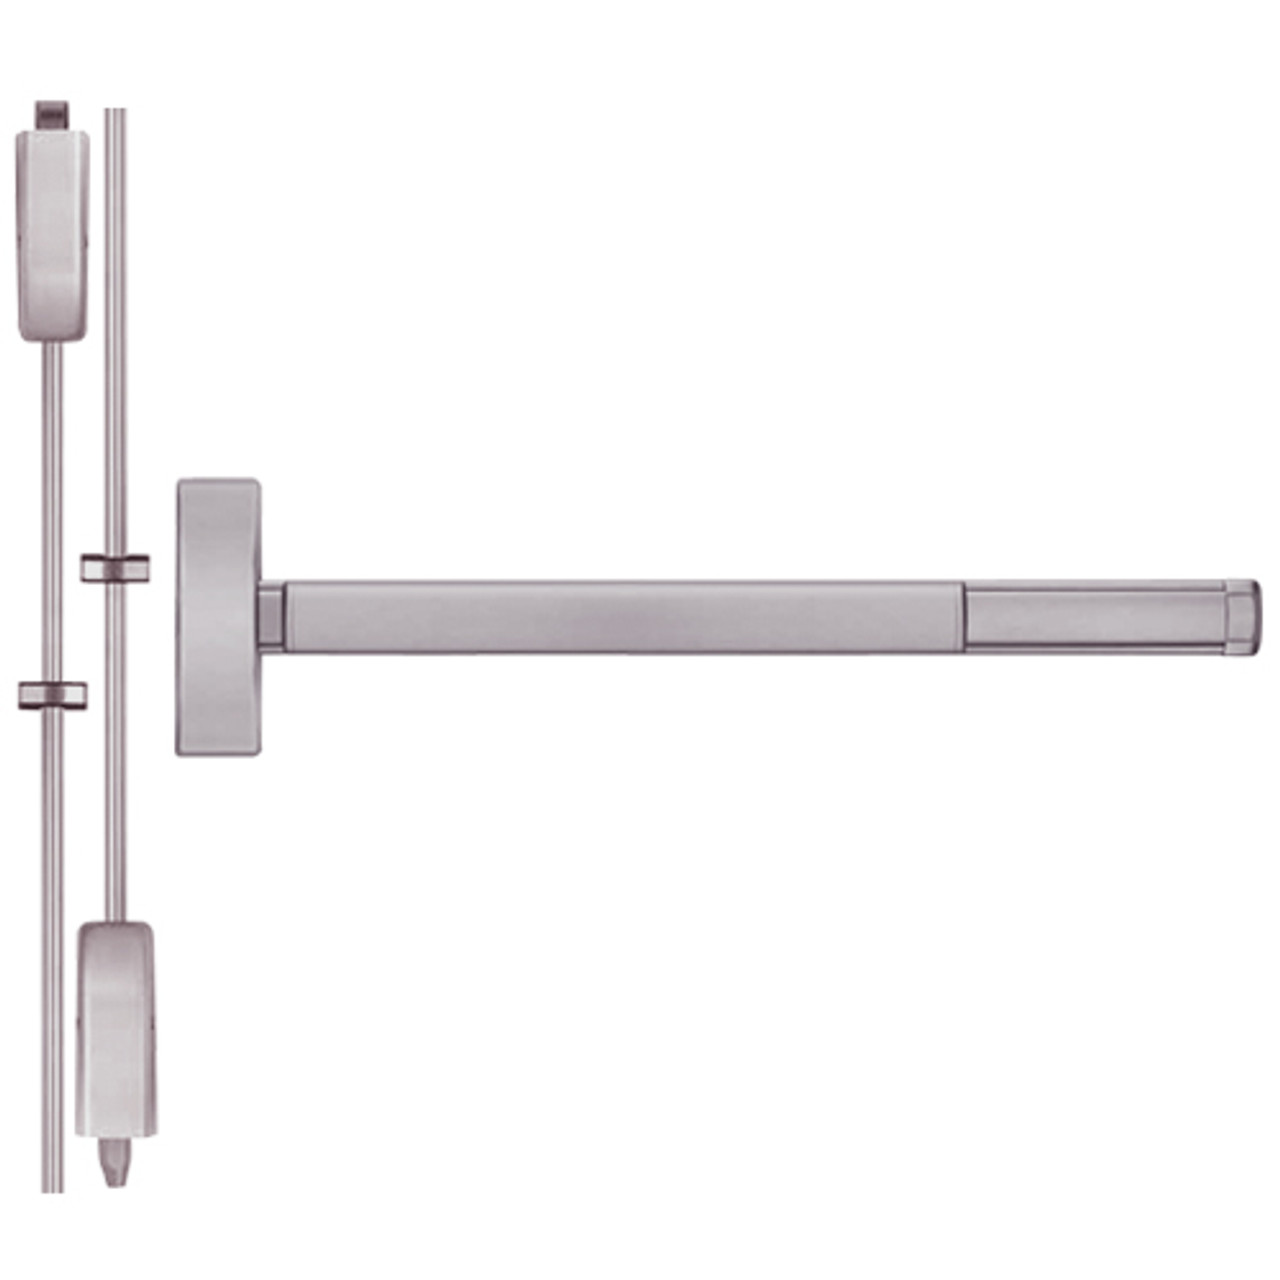 ELRFL2203-630-48 PHI 2200 Series Apex Surface Vertical Rod Device with Electric Latch Retraction Prepped for Key Retracts Latchbolt in Satin Stainless Steel Finish